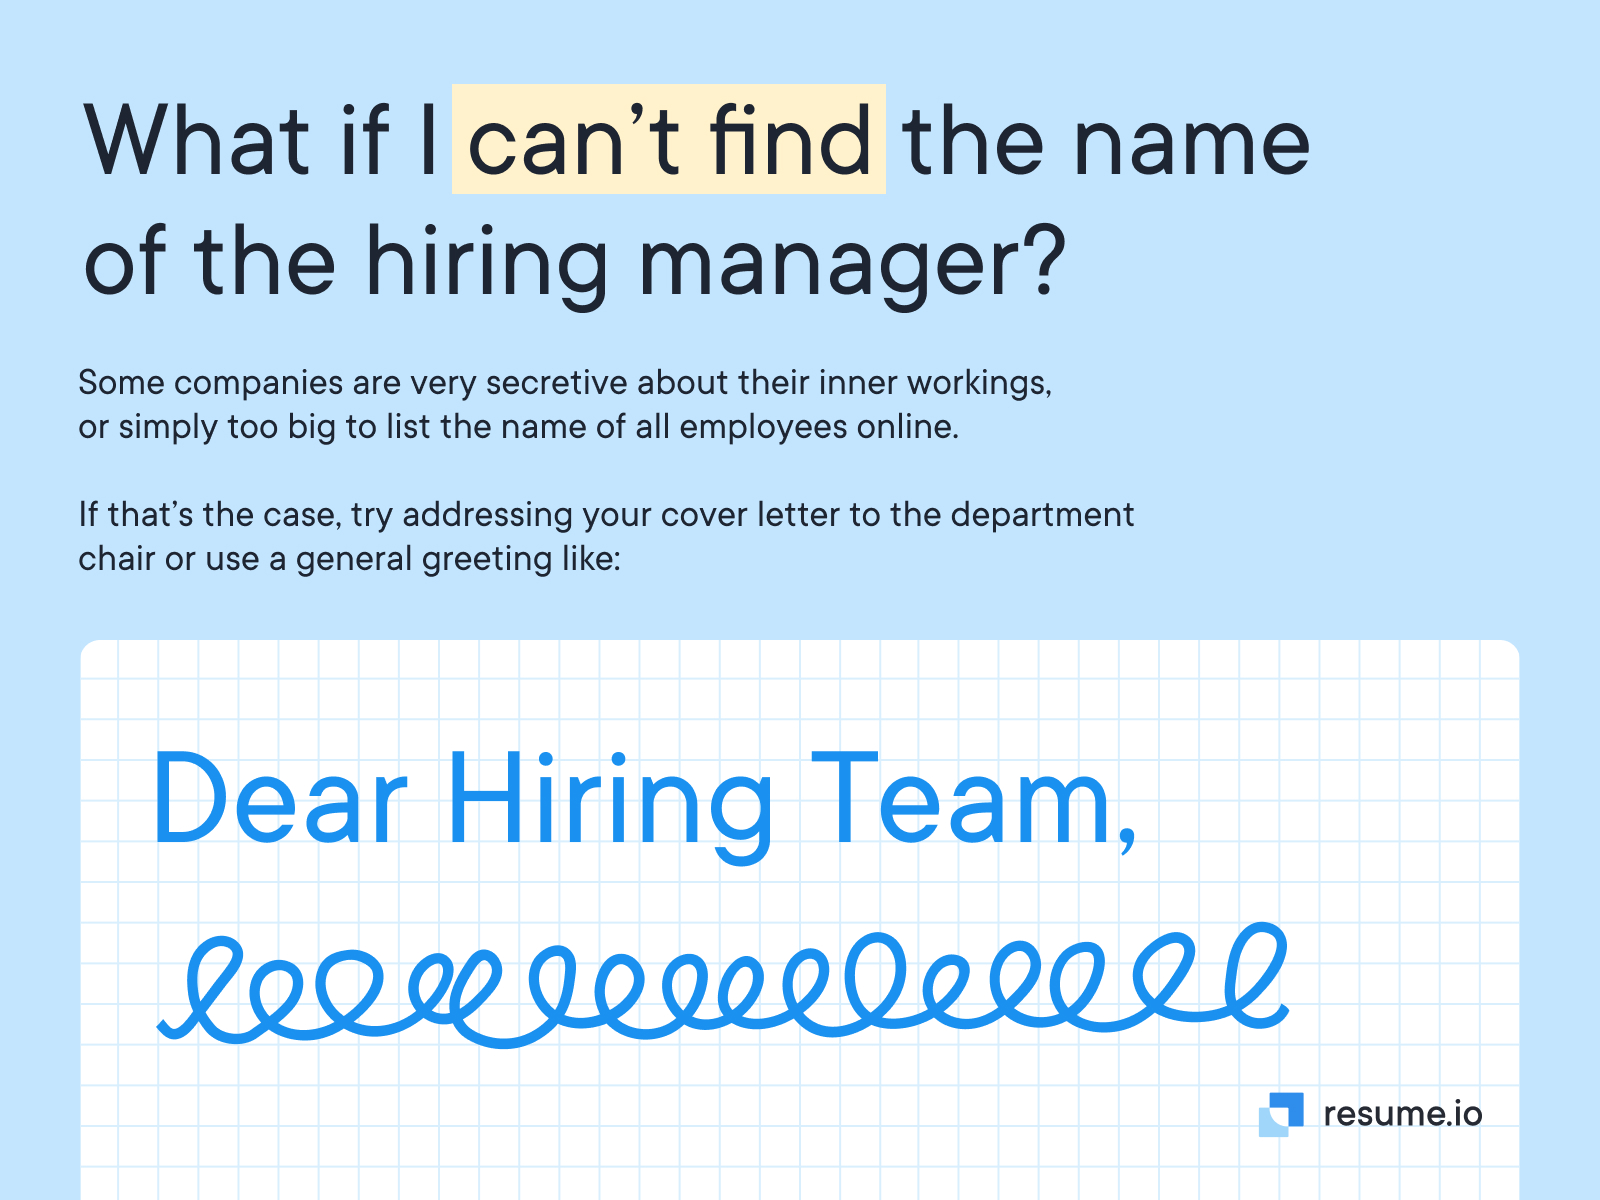 What if I can't find the name of the hiring manager?